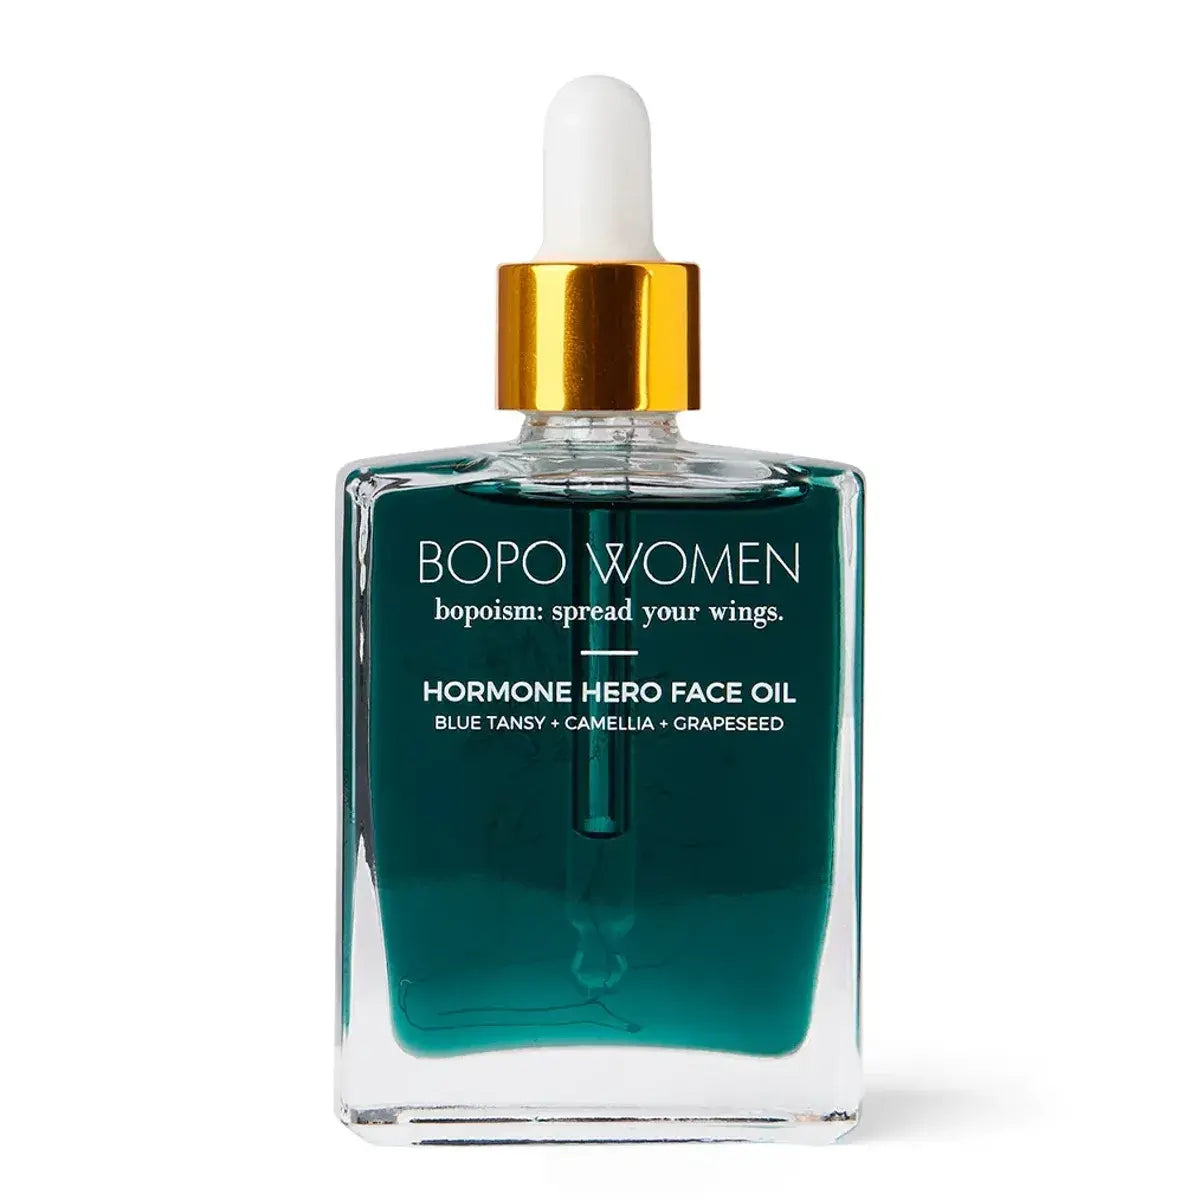 Hormone Hero Face Oil by Bopo Women - Blue Tansy, Camellia &amp; Grapeseed l Australian Made Natural Skincare